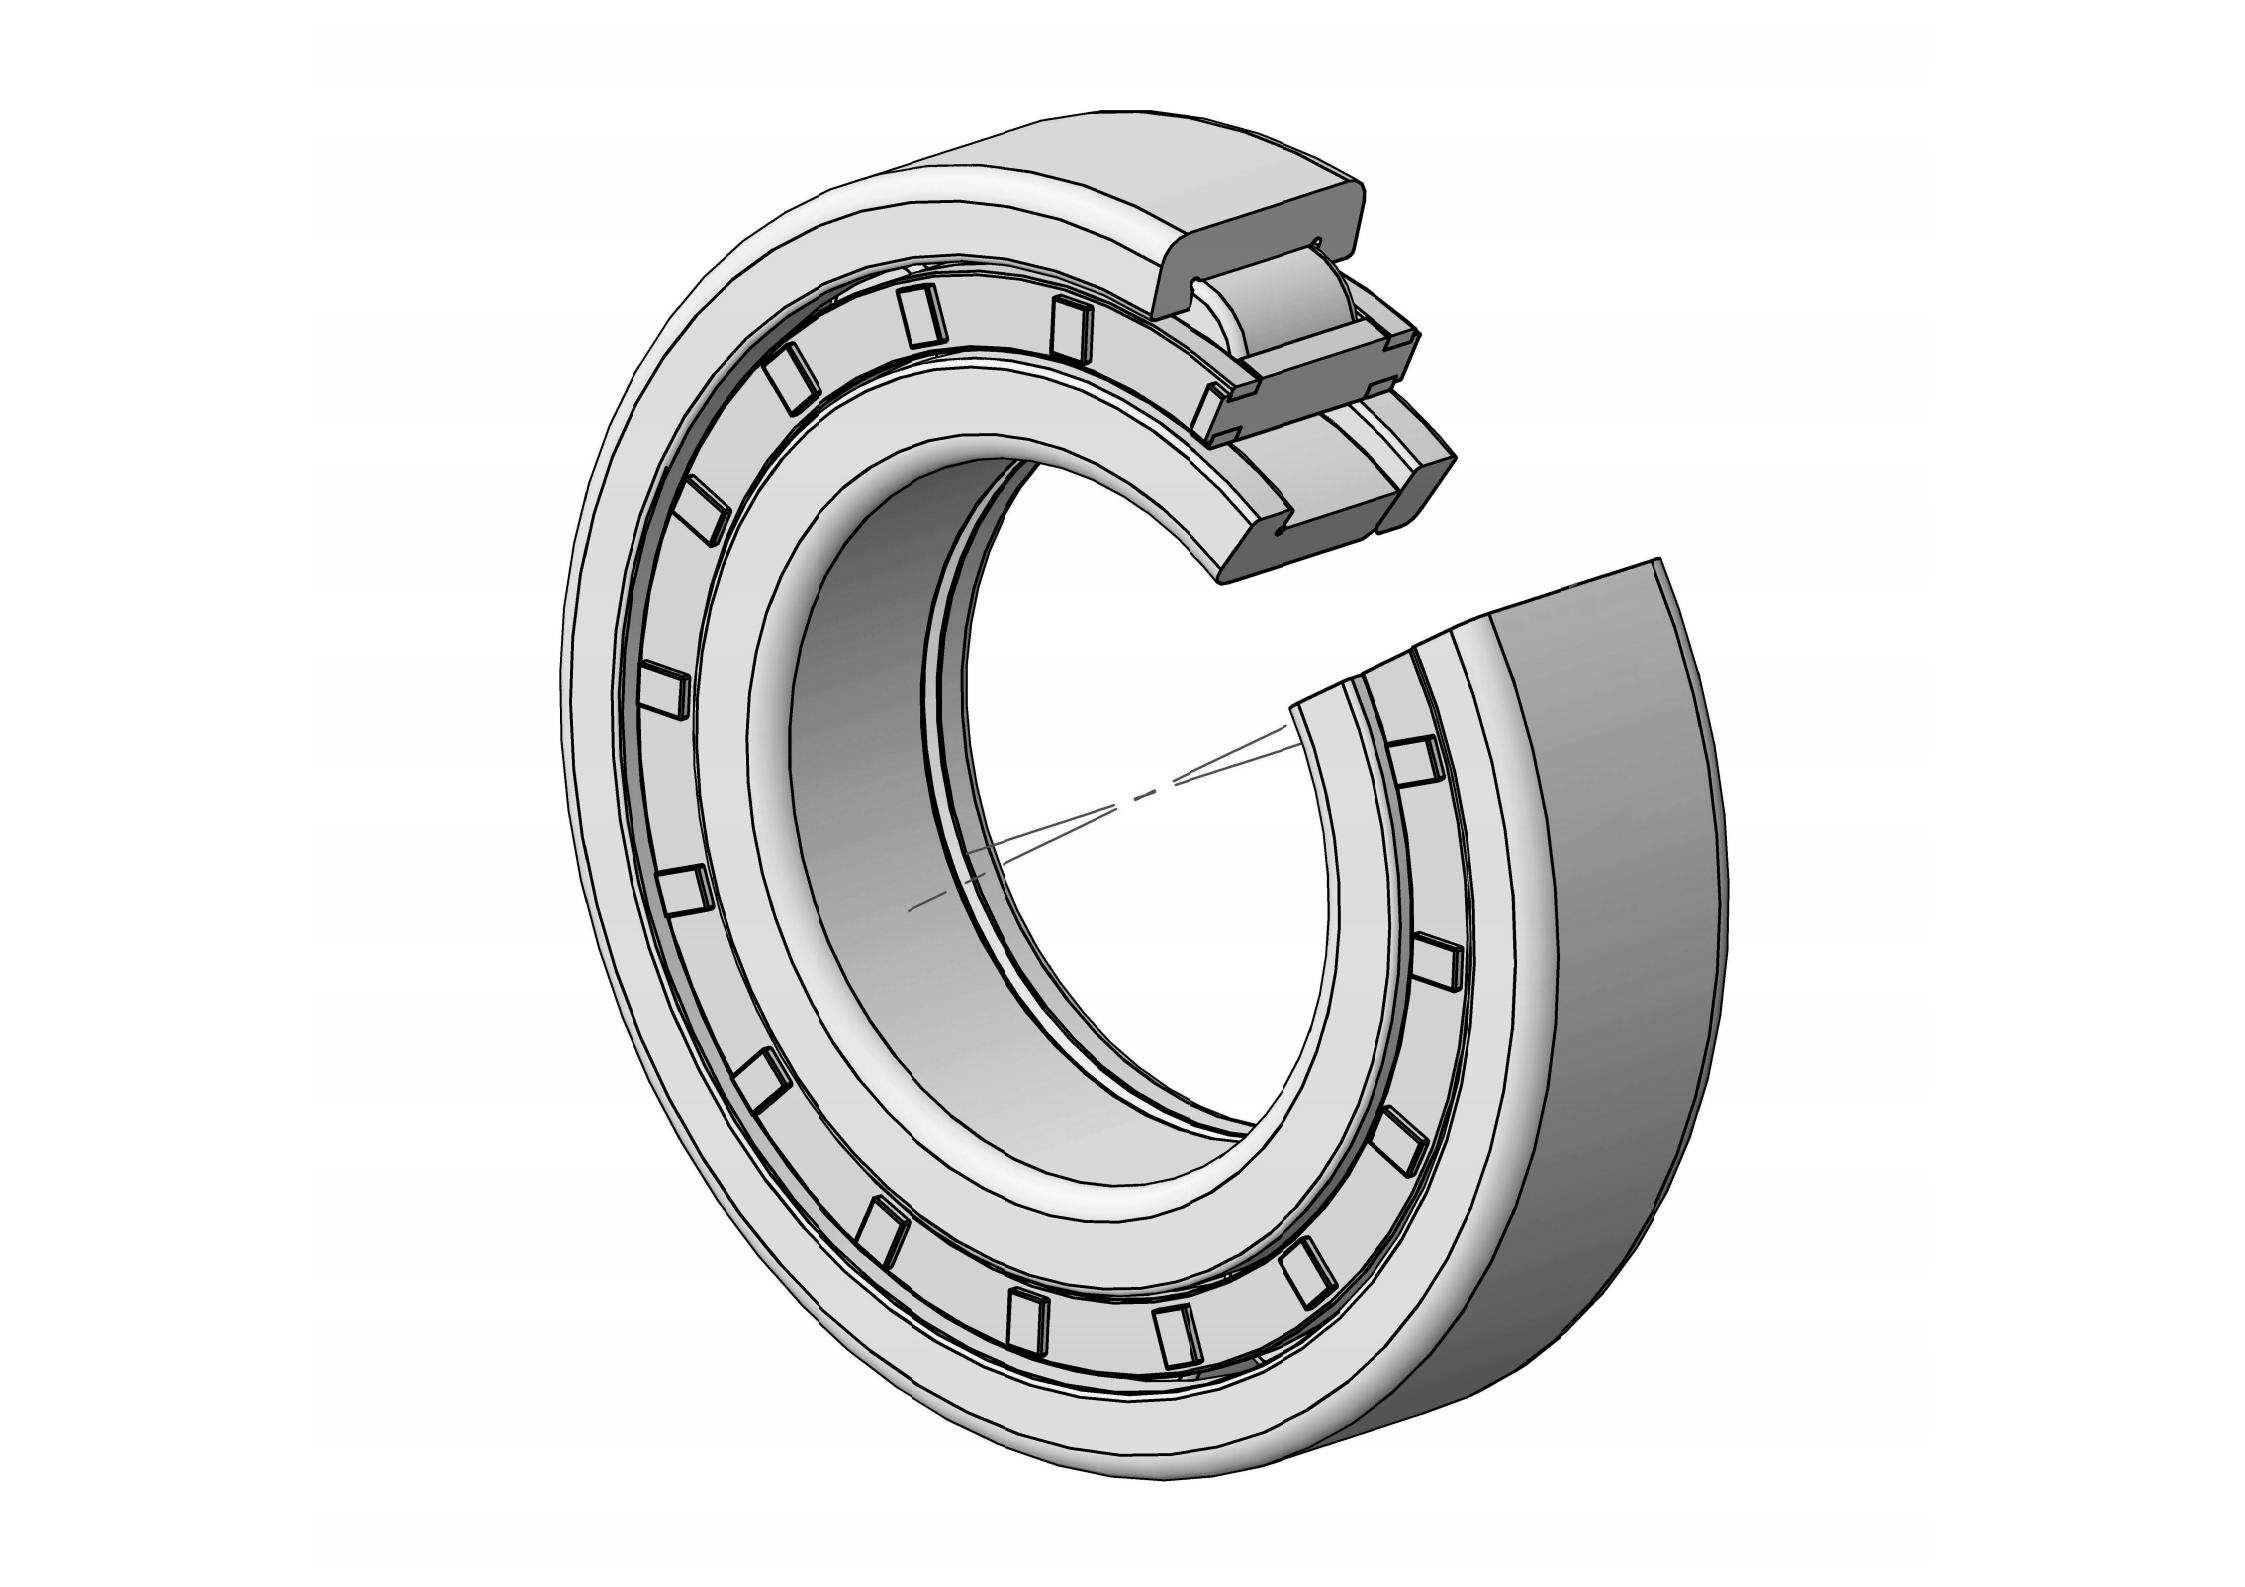 NUP326-EM Single Row Cylindrical roller bearing 